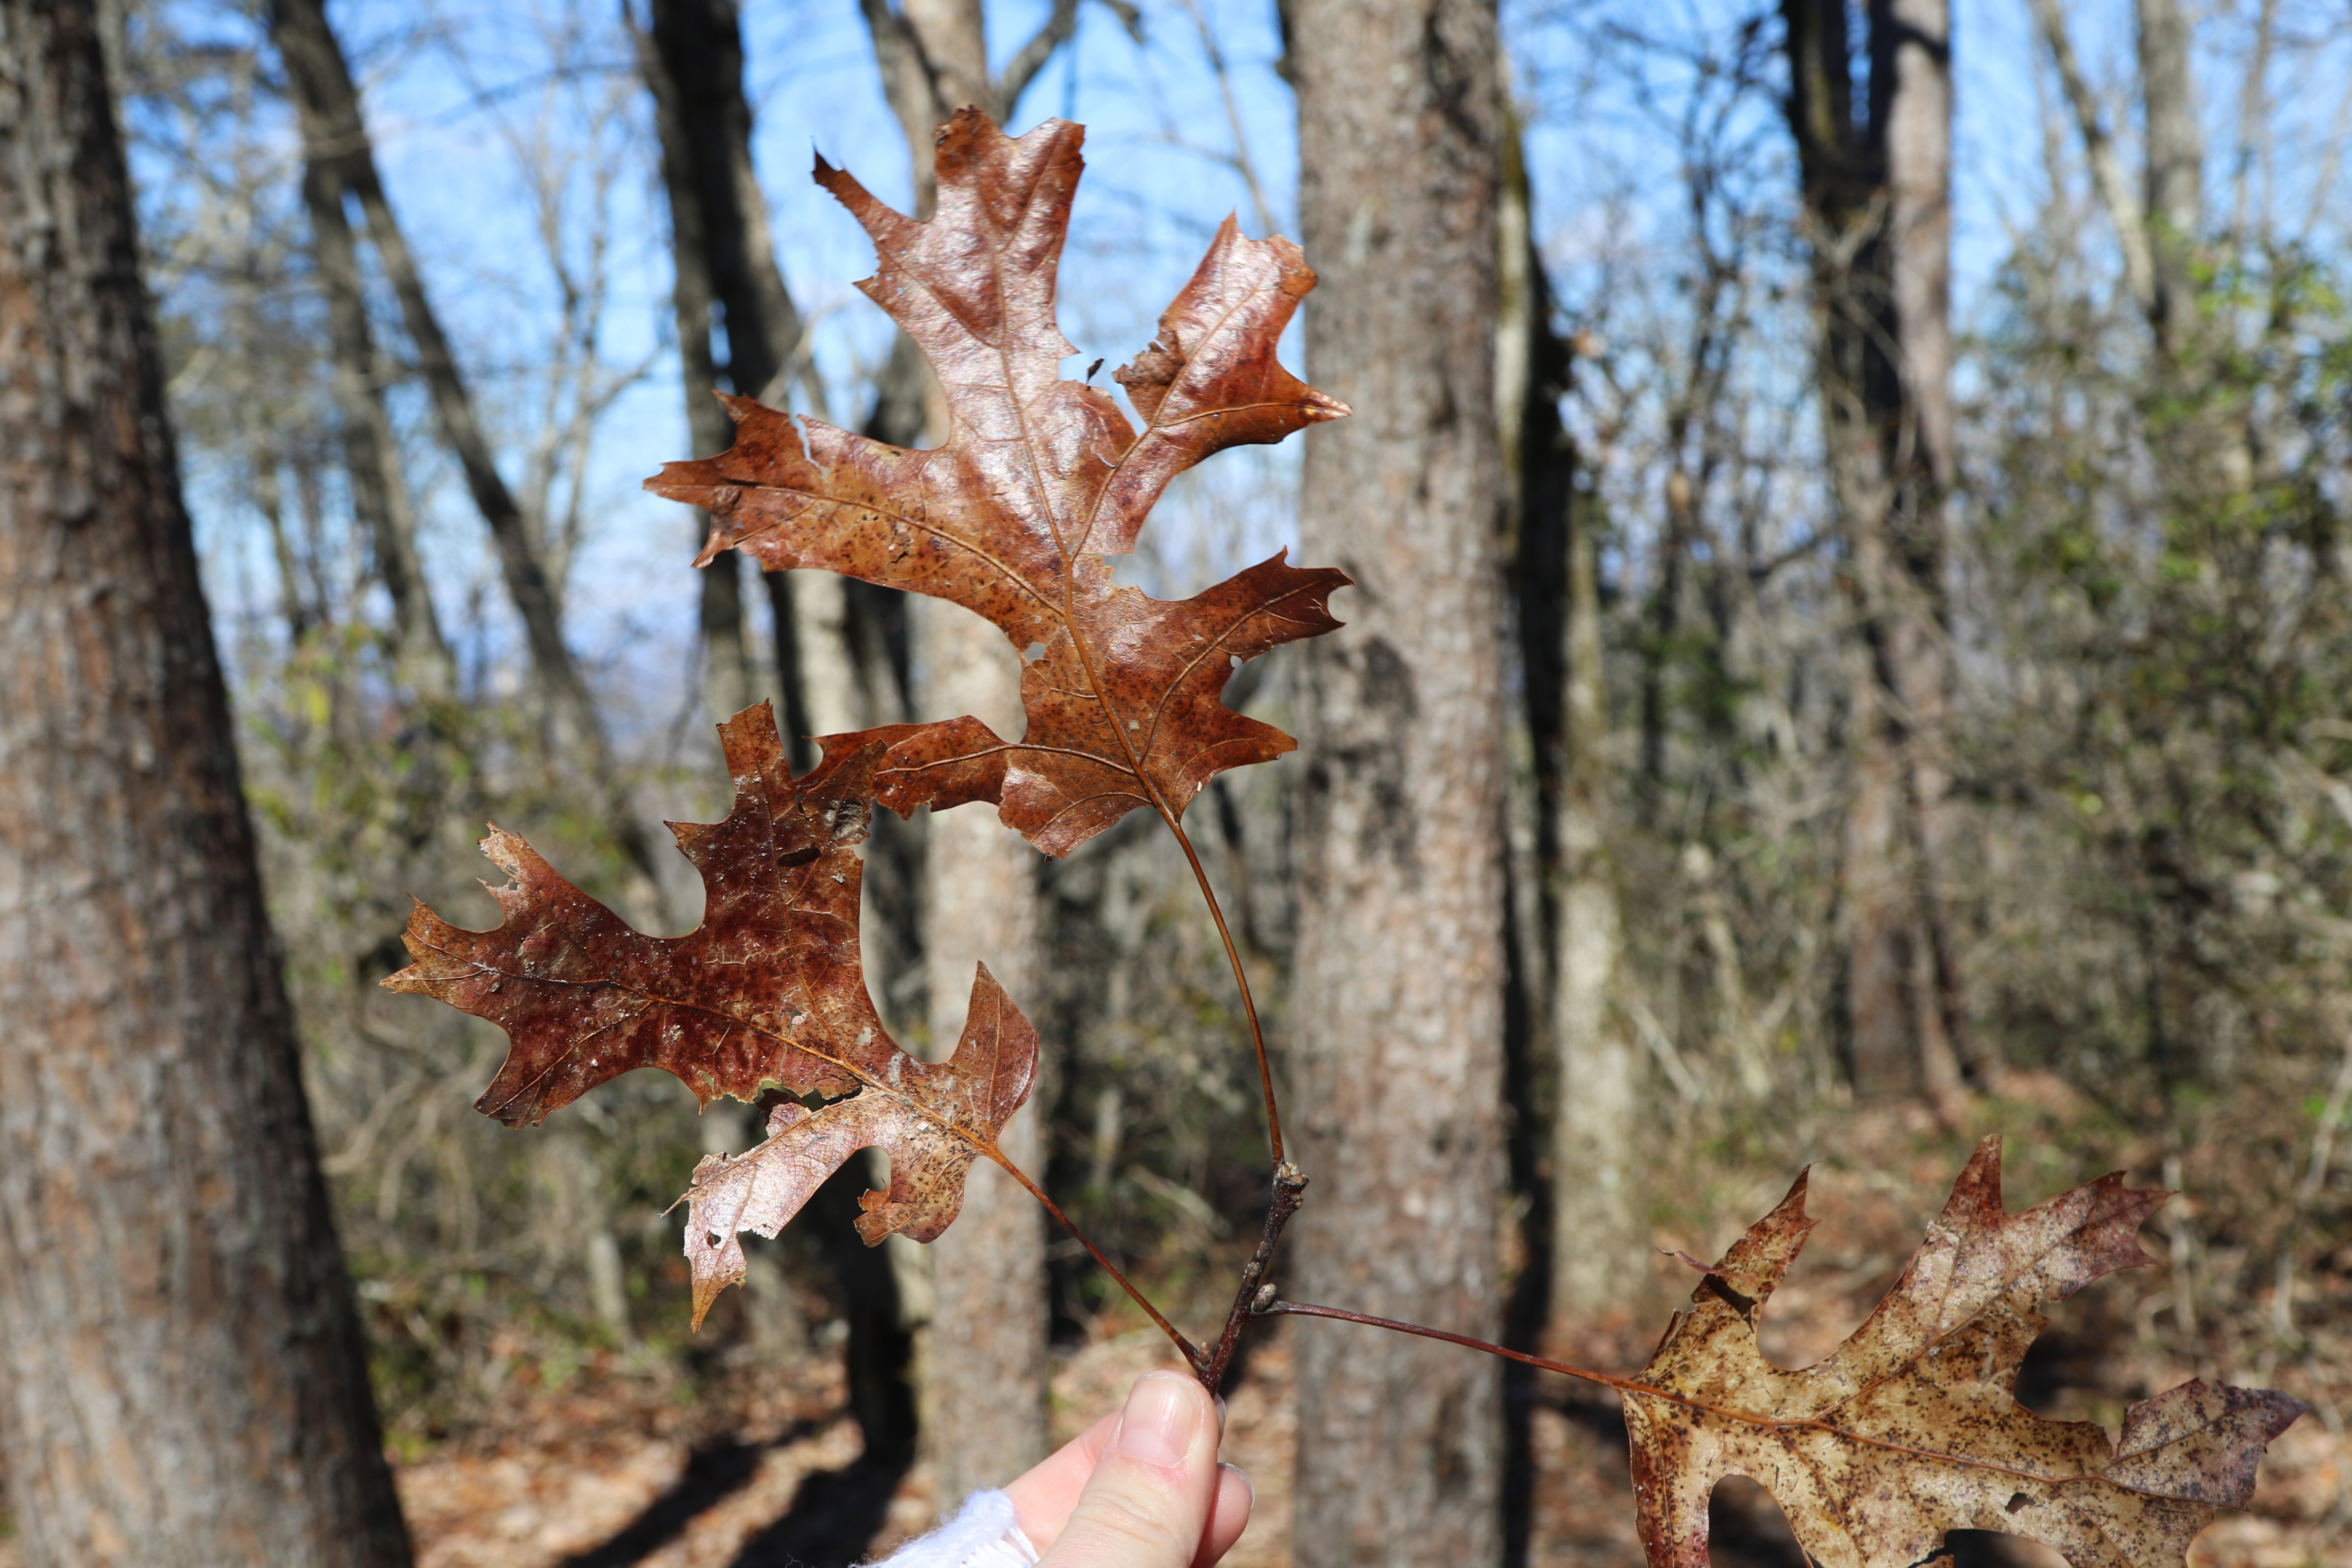 A bundle of brown oak leaves being held up by a hand.